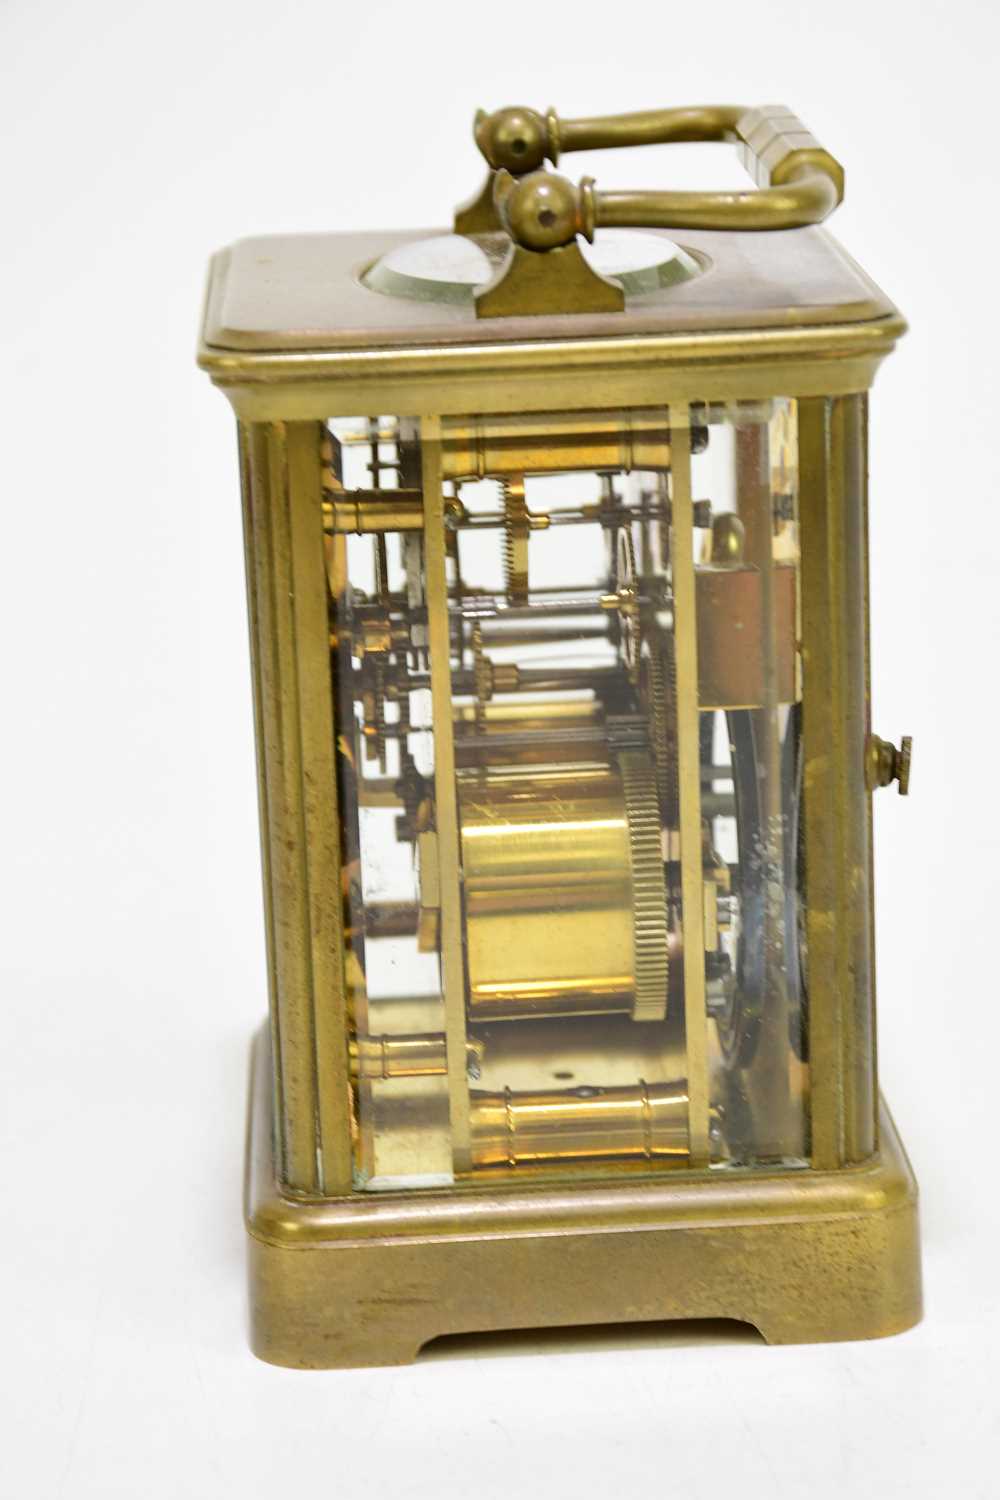 J.W. BENSON, LUDGATE HILL LONDON; a 19th century carriage clock with swing handle, the enamelled - Image 5 of 5